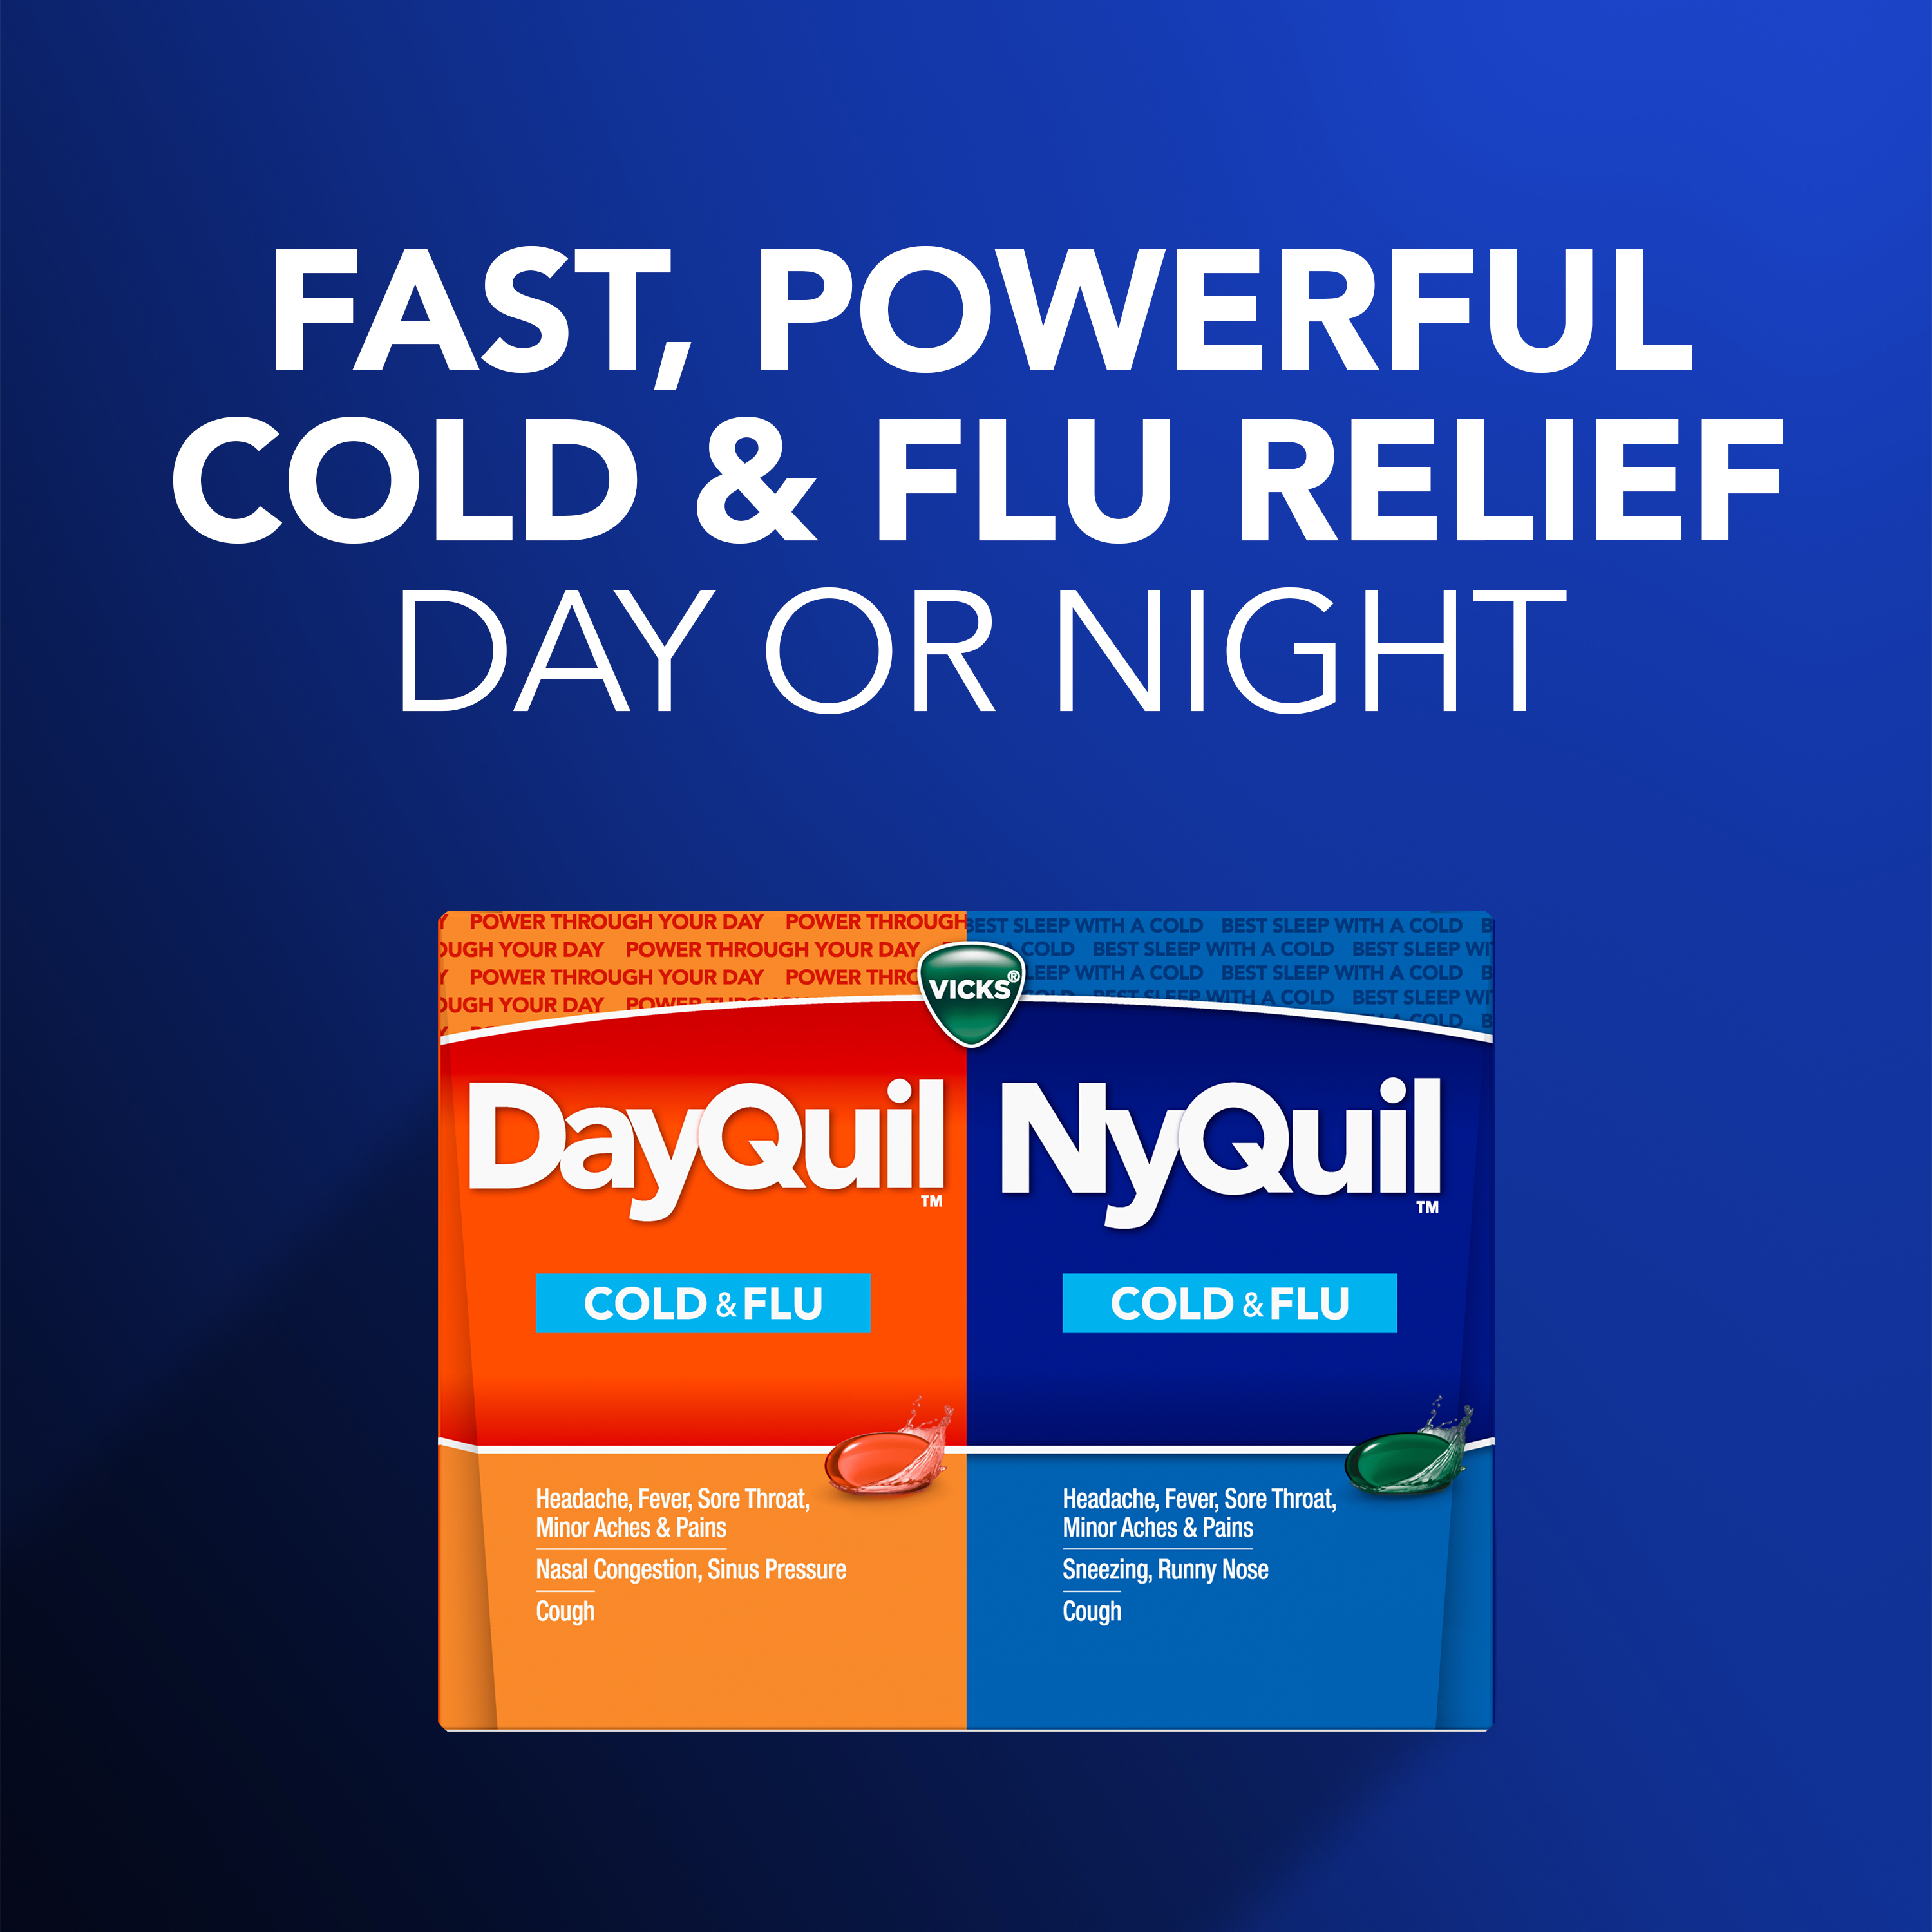 Fast, Powerful cold & Flu relief day or night